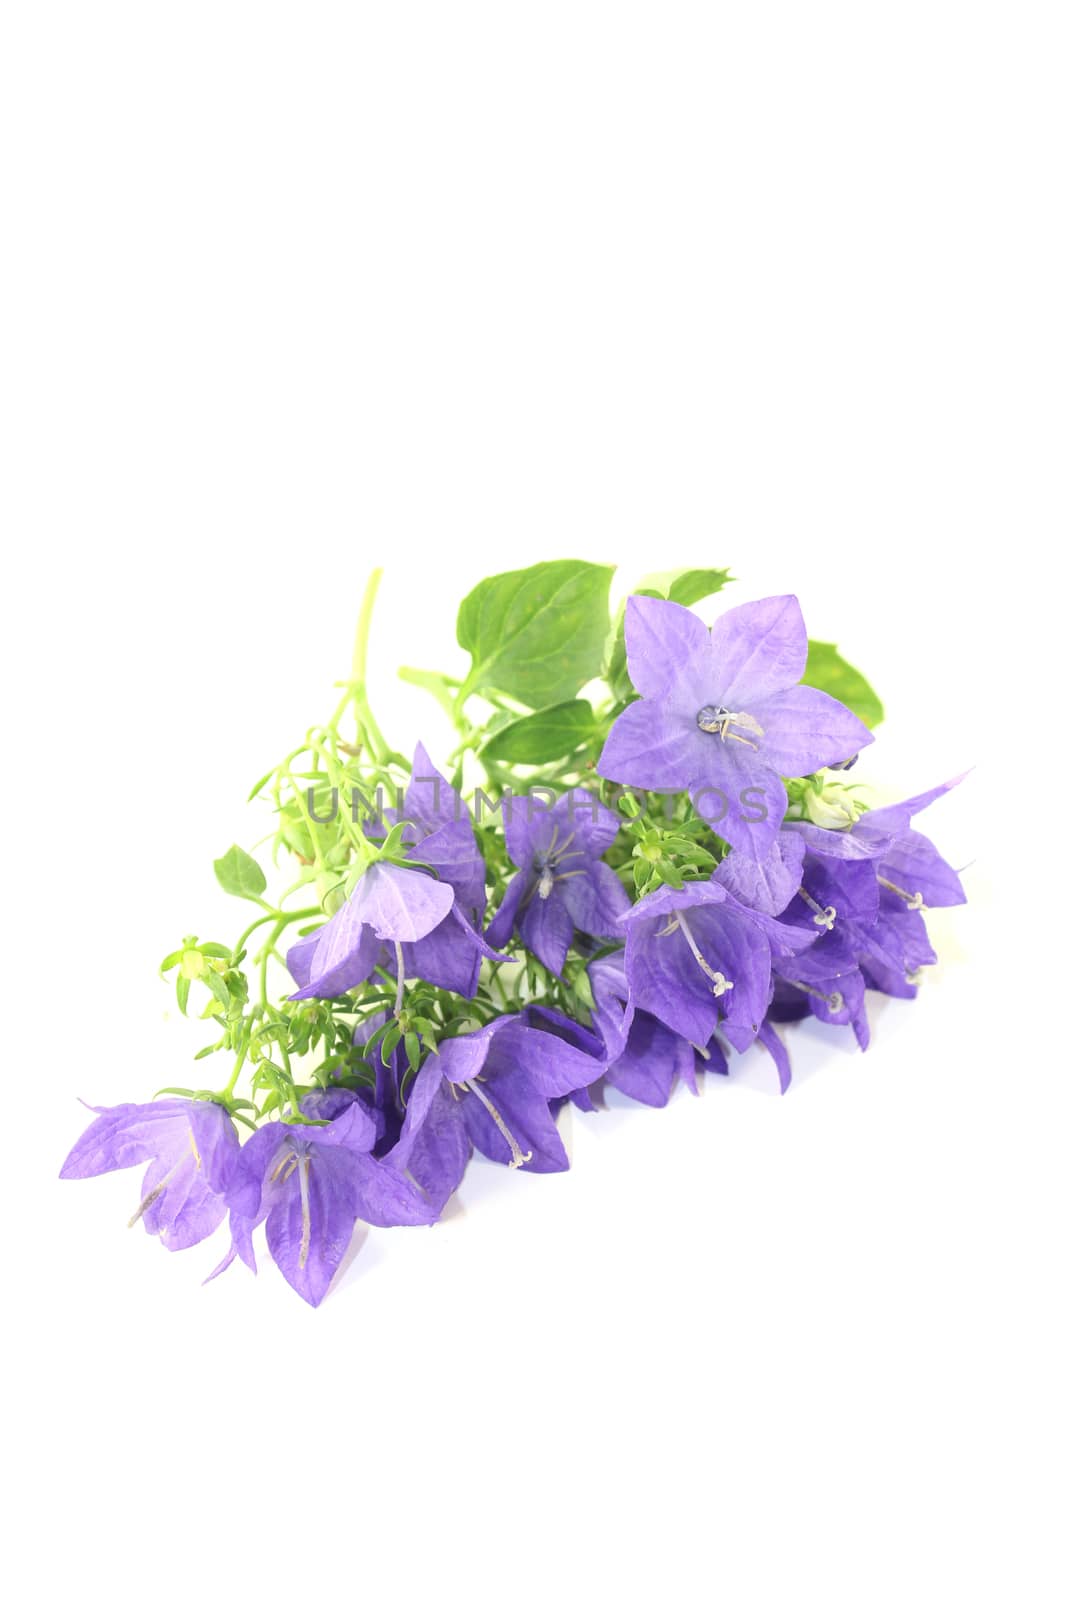 blue bellflowers by discovery